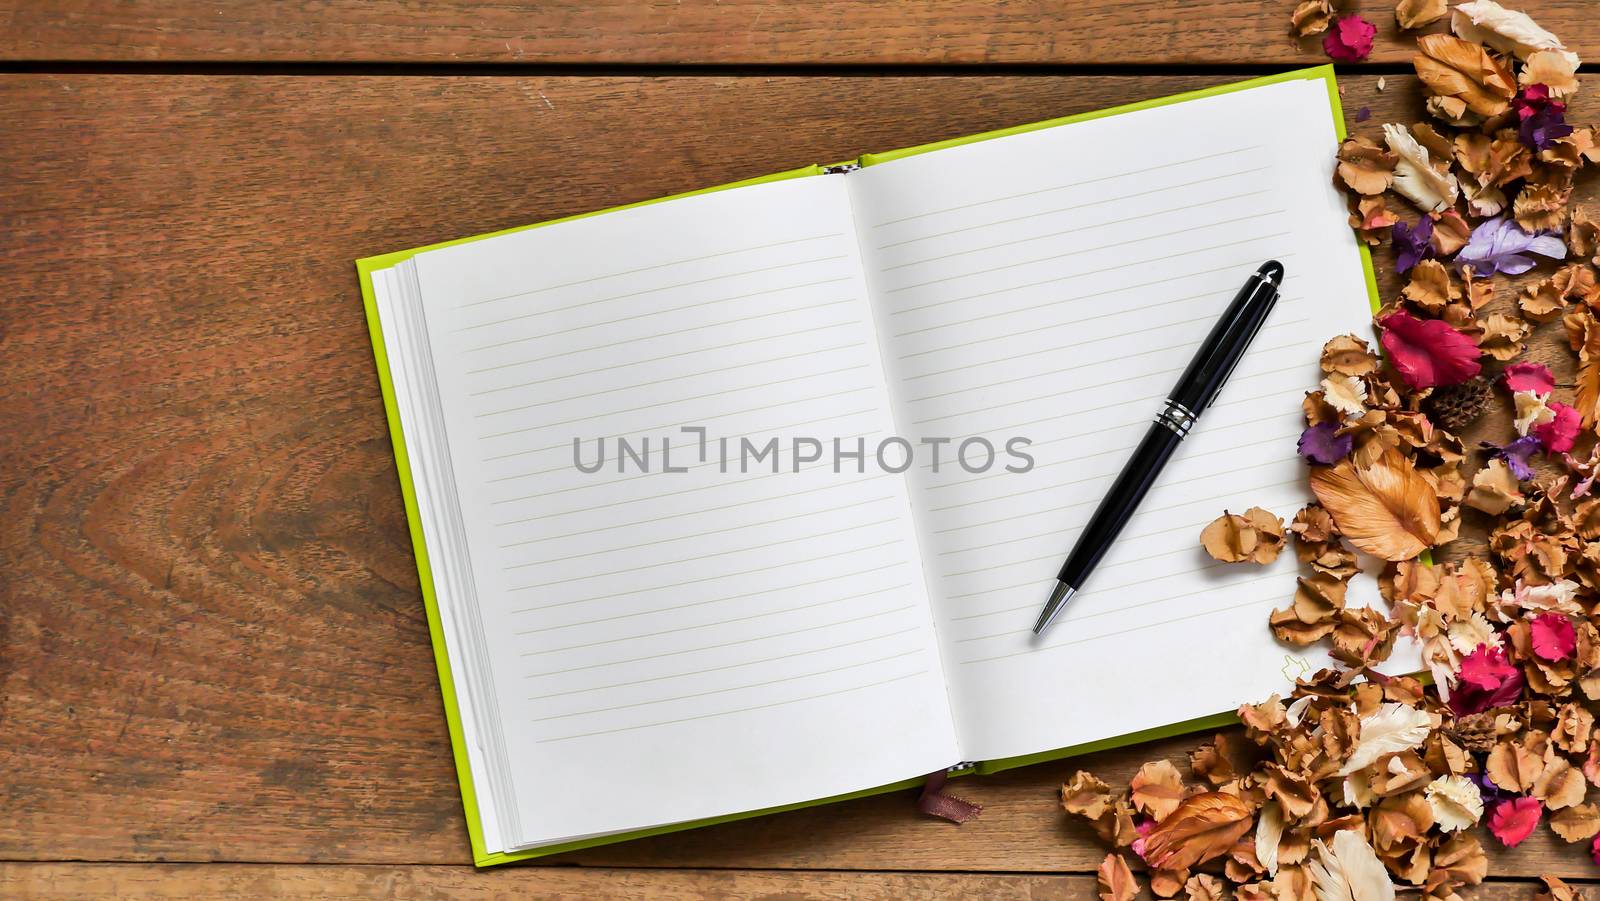 Top view workspace with blank notebook,pen and dried flowers on wooden table background.